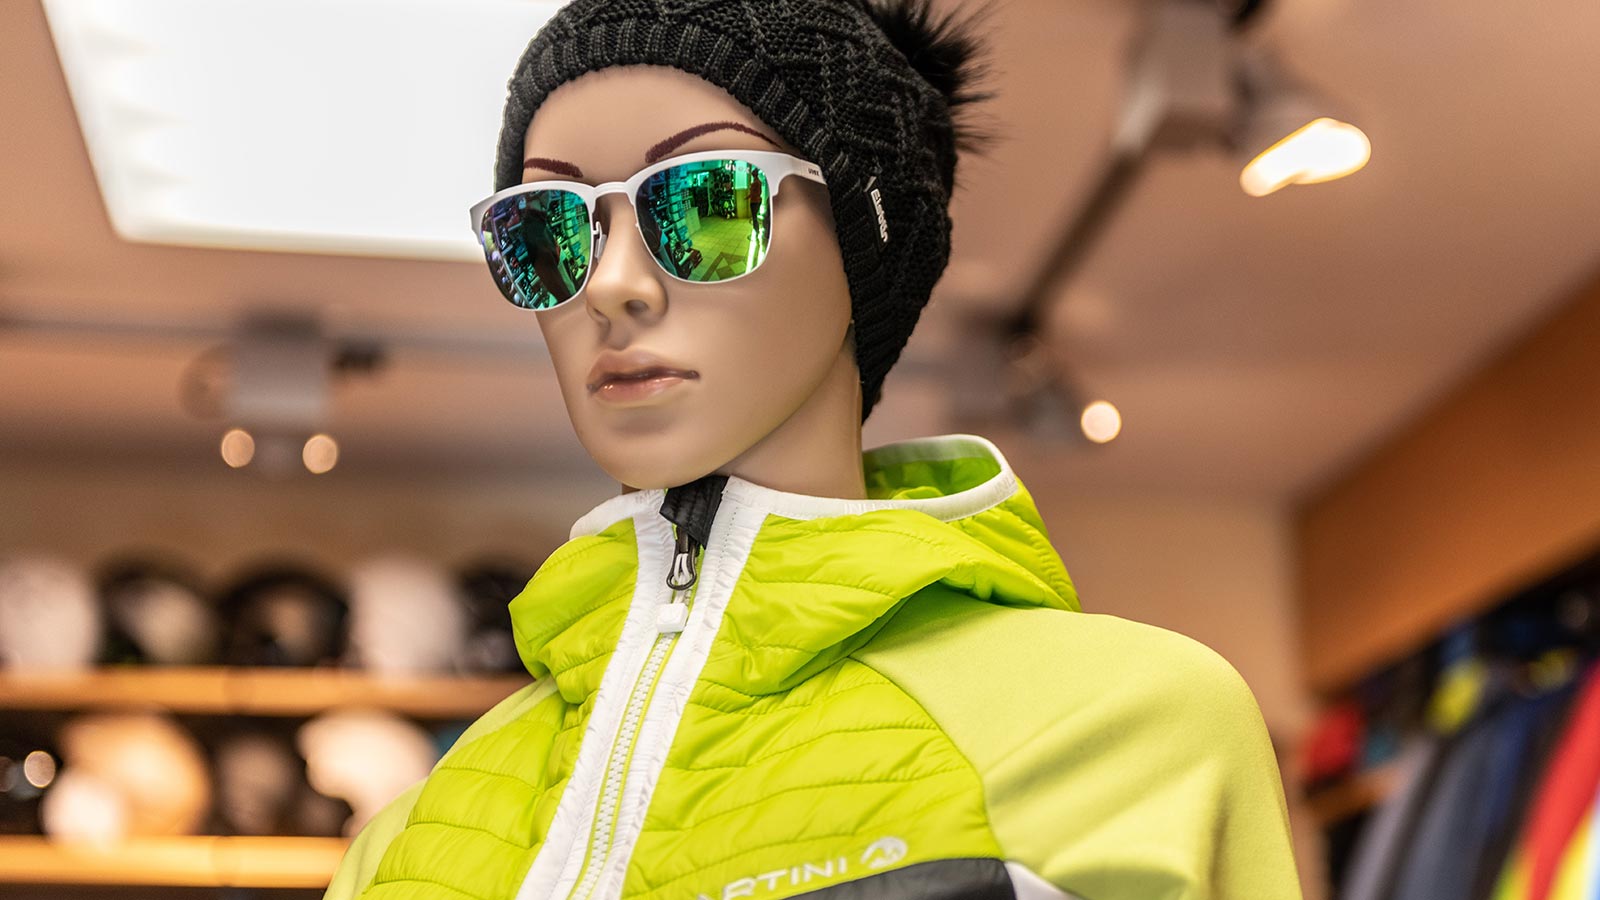 One of the mannequins of the ski and snowboard shop in Alta Badia